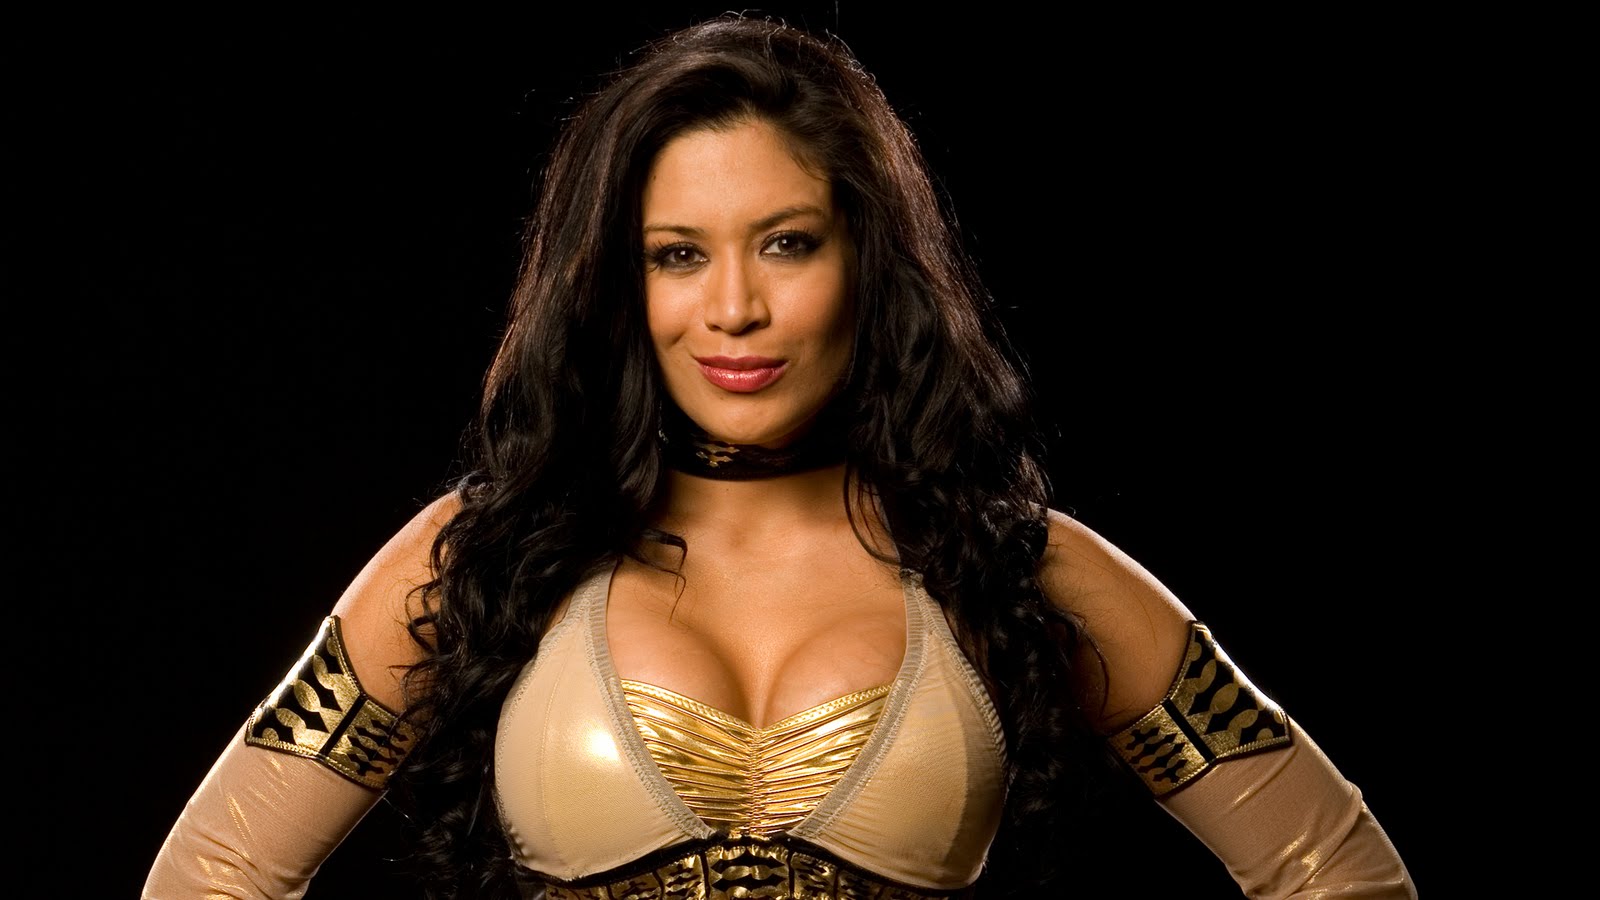 Wwe melina Sexy n Hot Photo, WWE Wwe melina Hottest Still, Hot Queen Wwe me...